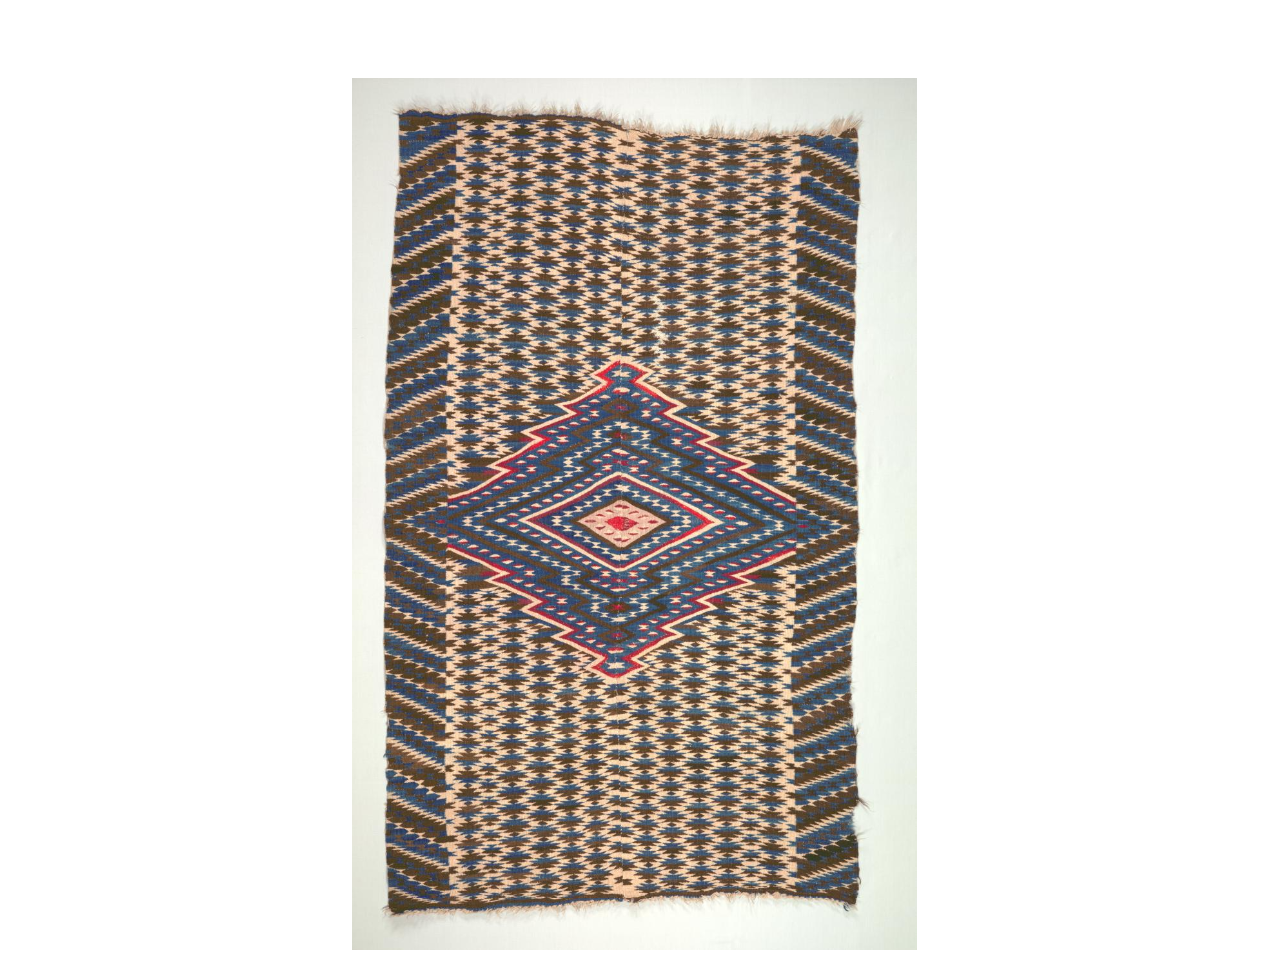 Example of Saltillo Style Blanket with an intricate blue and red diamond pattern.